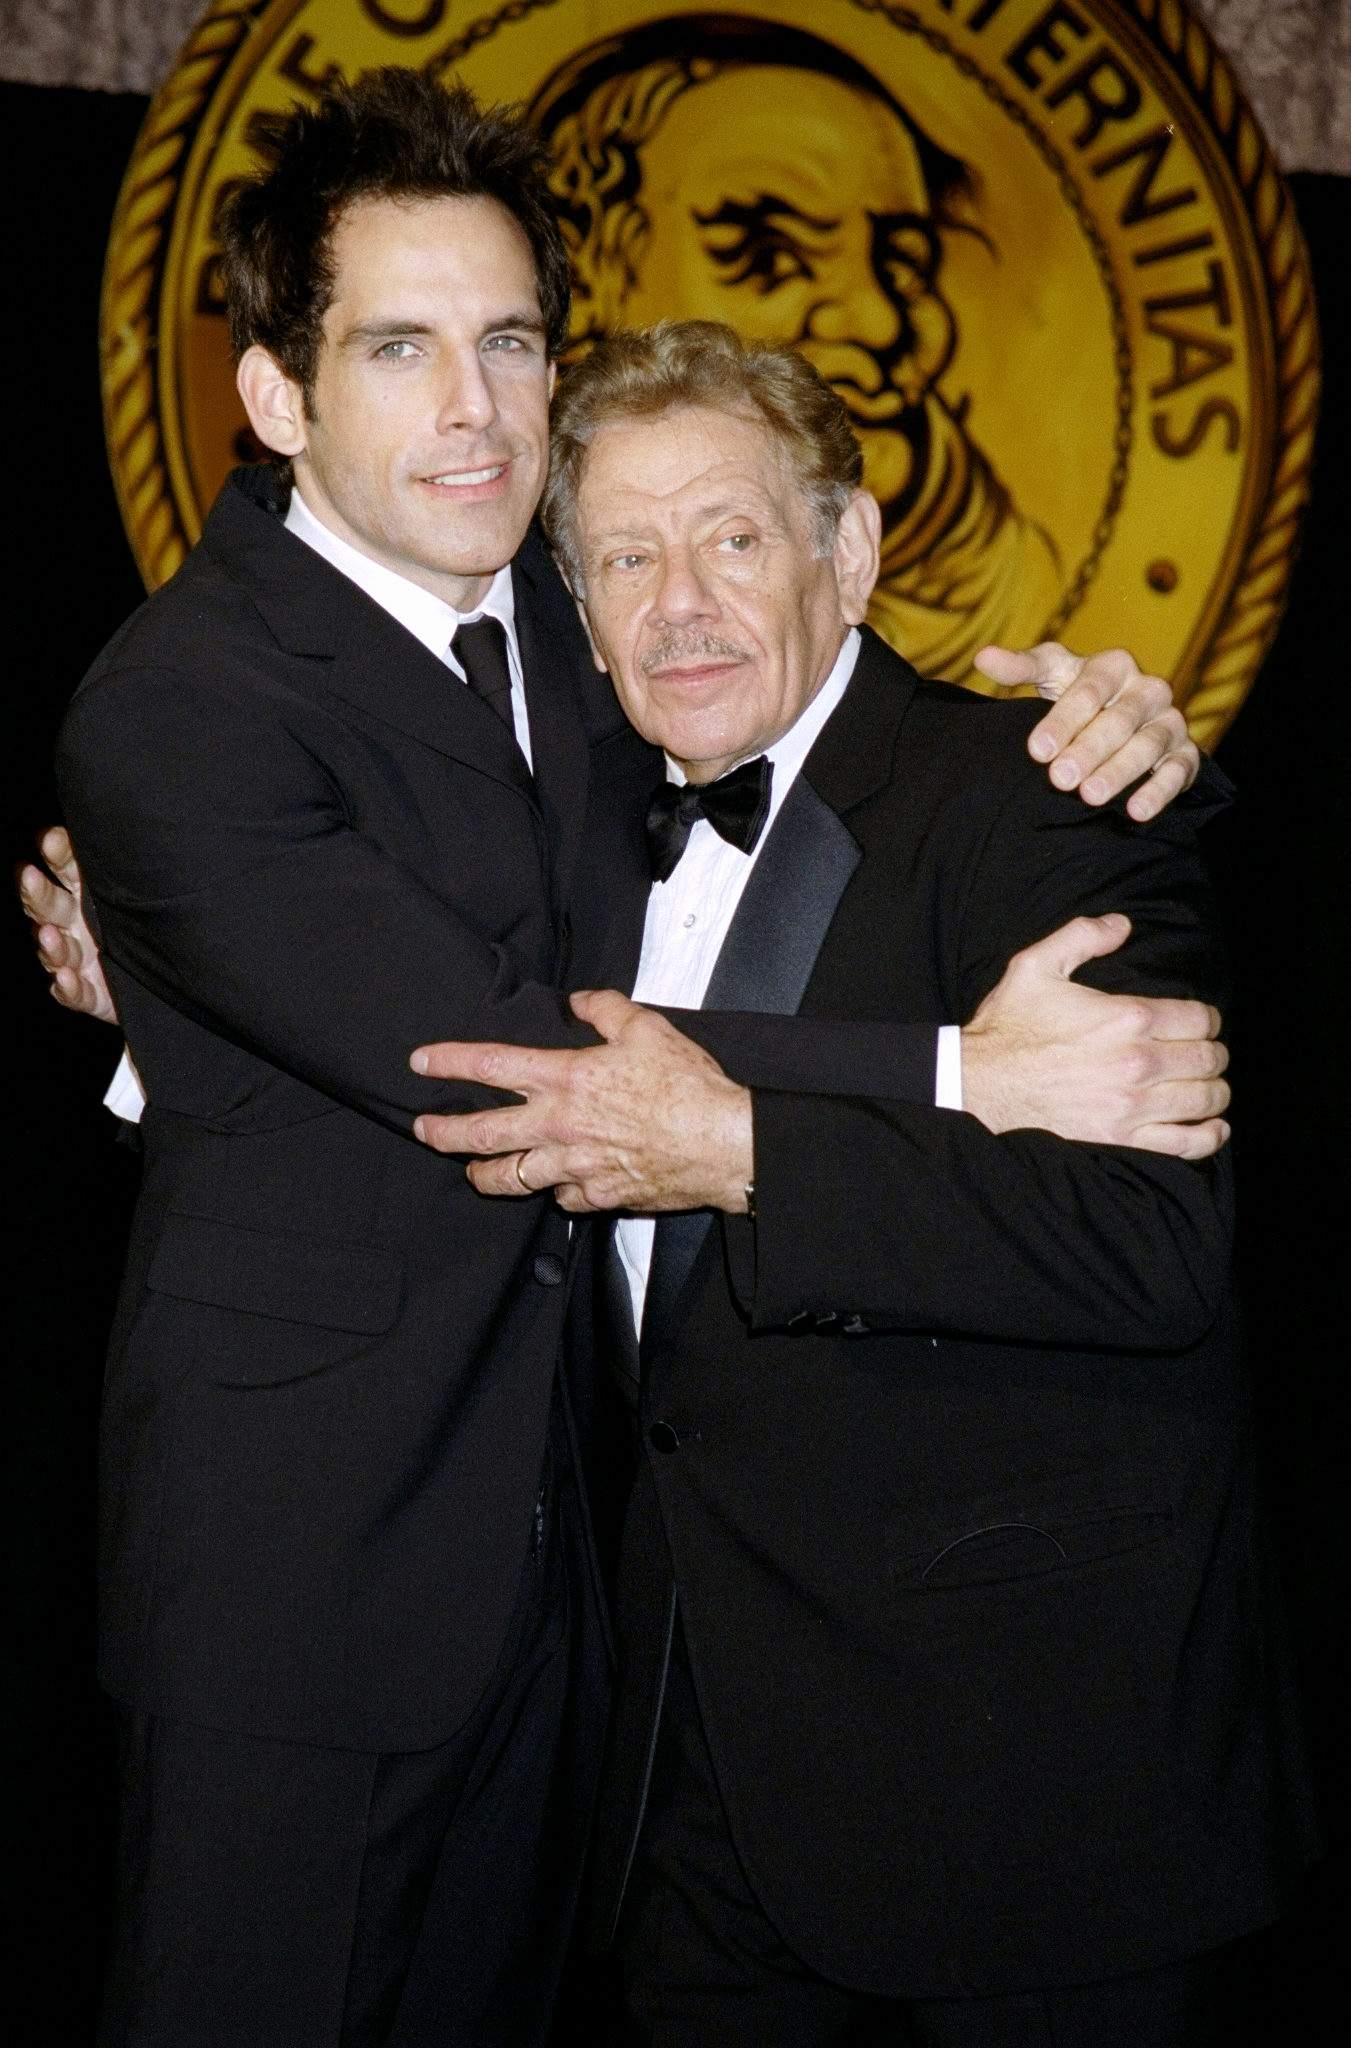 Ben Stiller with his dad, Jerry Stiller at the Hilton Hotel. | Source: Getty Images